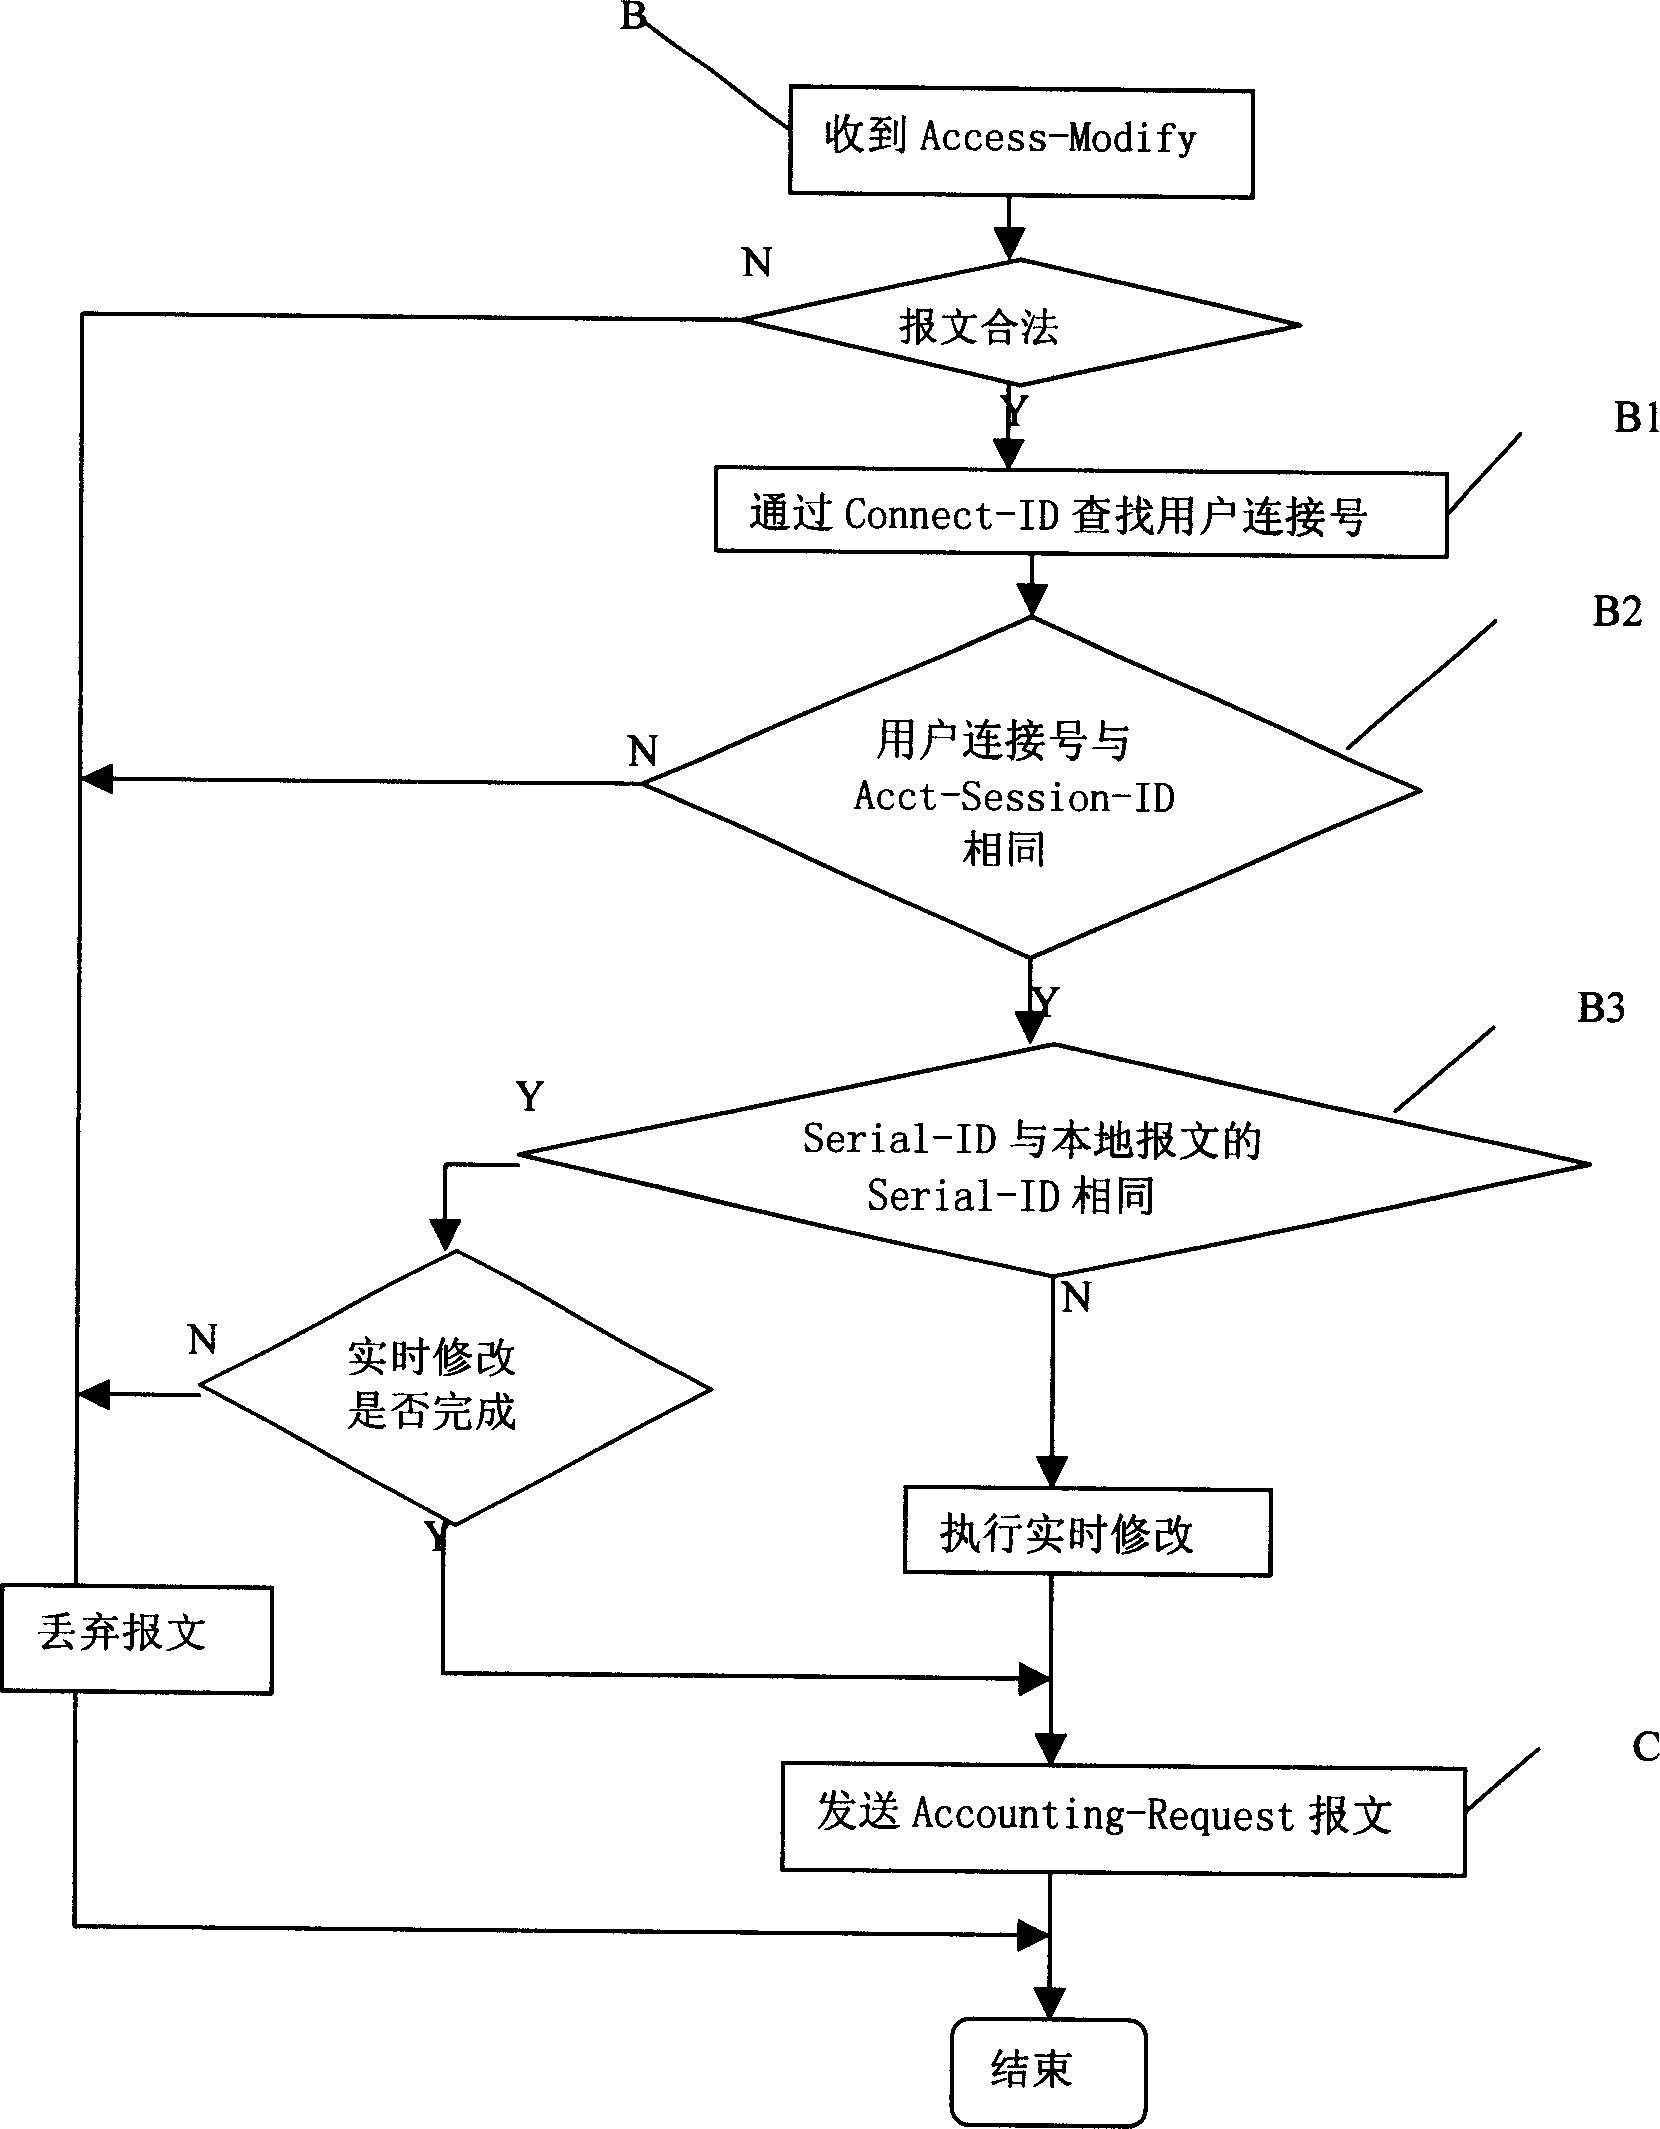 Method of real time modifying business during realizing identifying authorized charge procedure